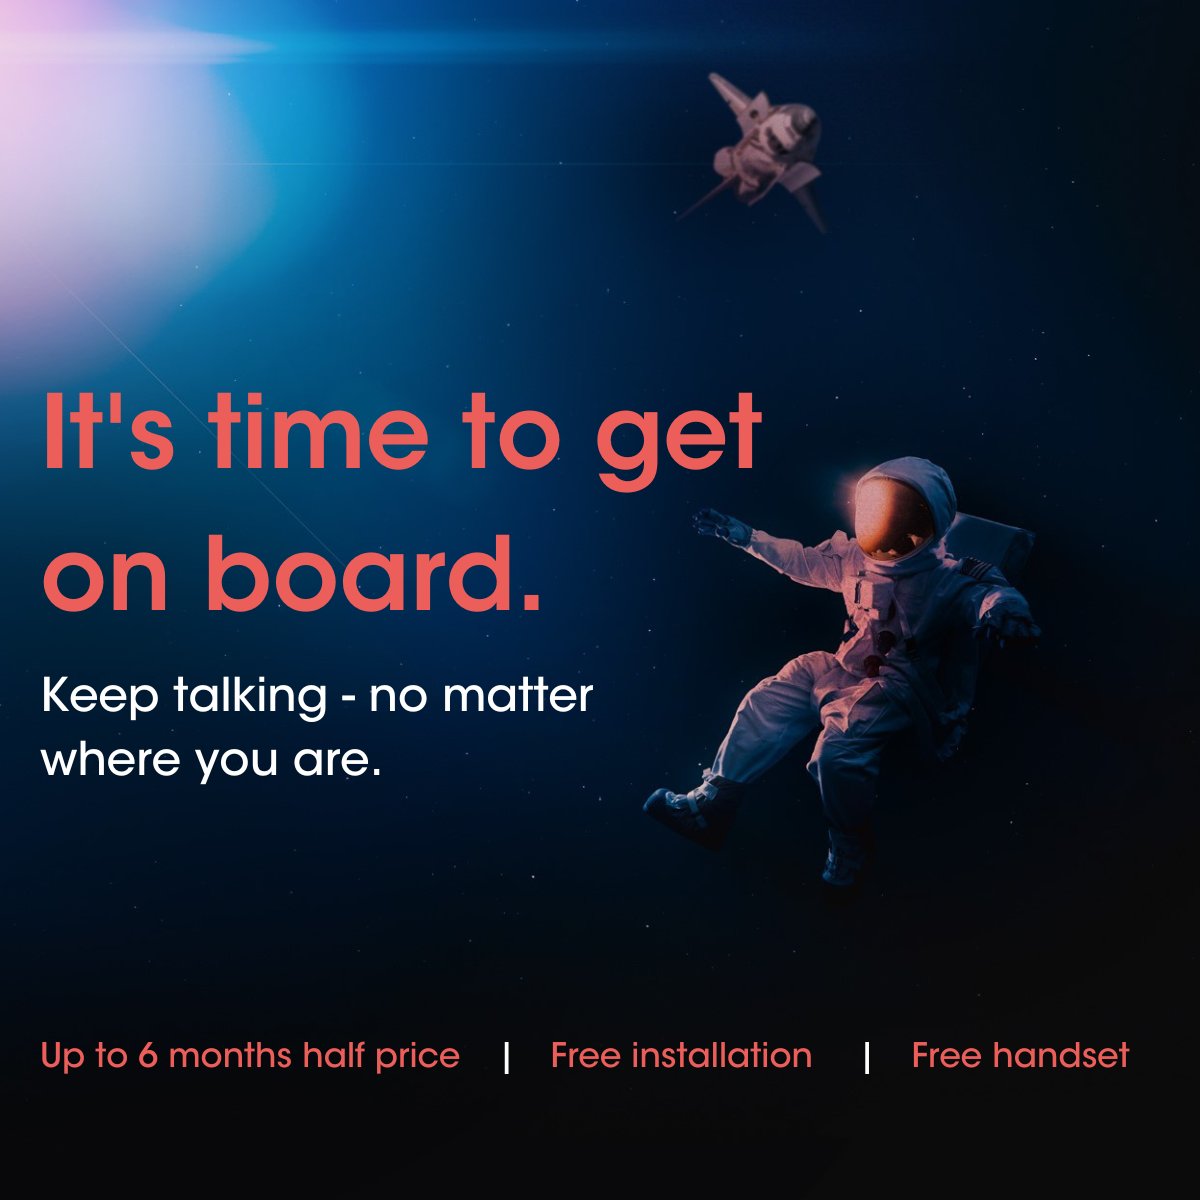 It’s time to get onboard! We’re here to help you get ahead and switch to the cloud seamlessly. We are offering you: ⭐Up to 6 months half price ⭐Free installation ⭐Free handset (up to £150) View our full offer here: eu1.hubs.ly/H02WLR_0 Get in touch now! | 01604 673320